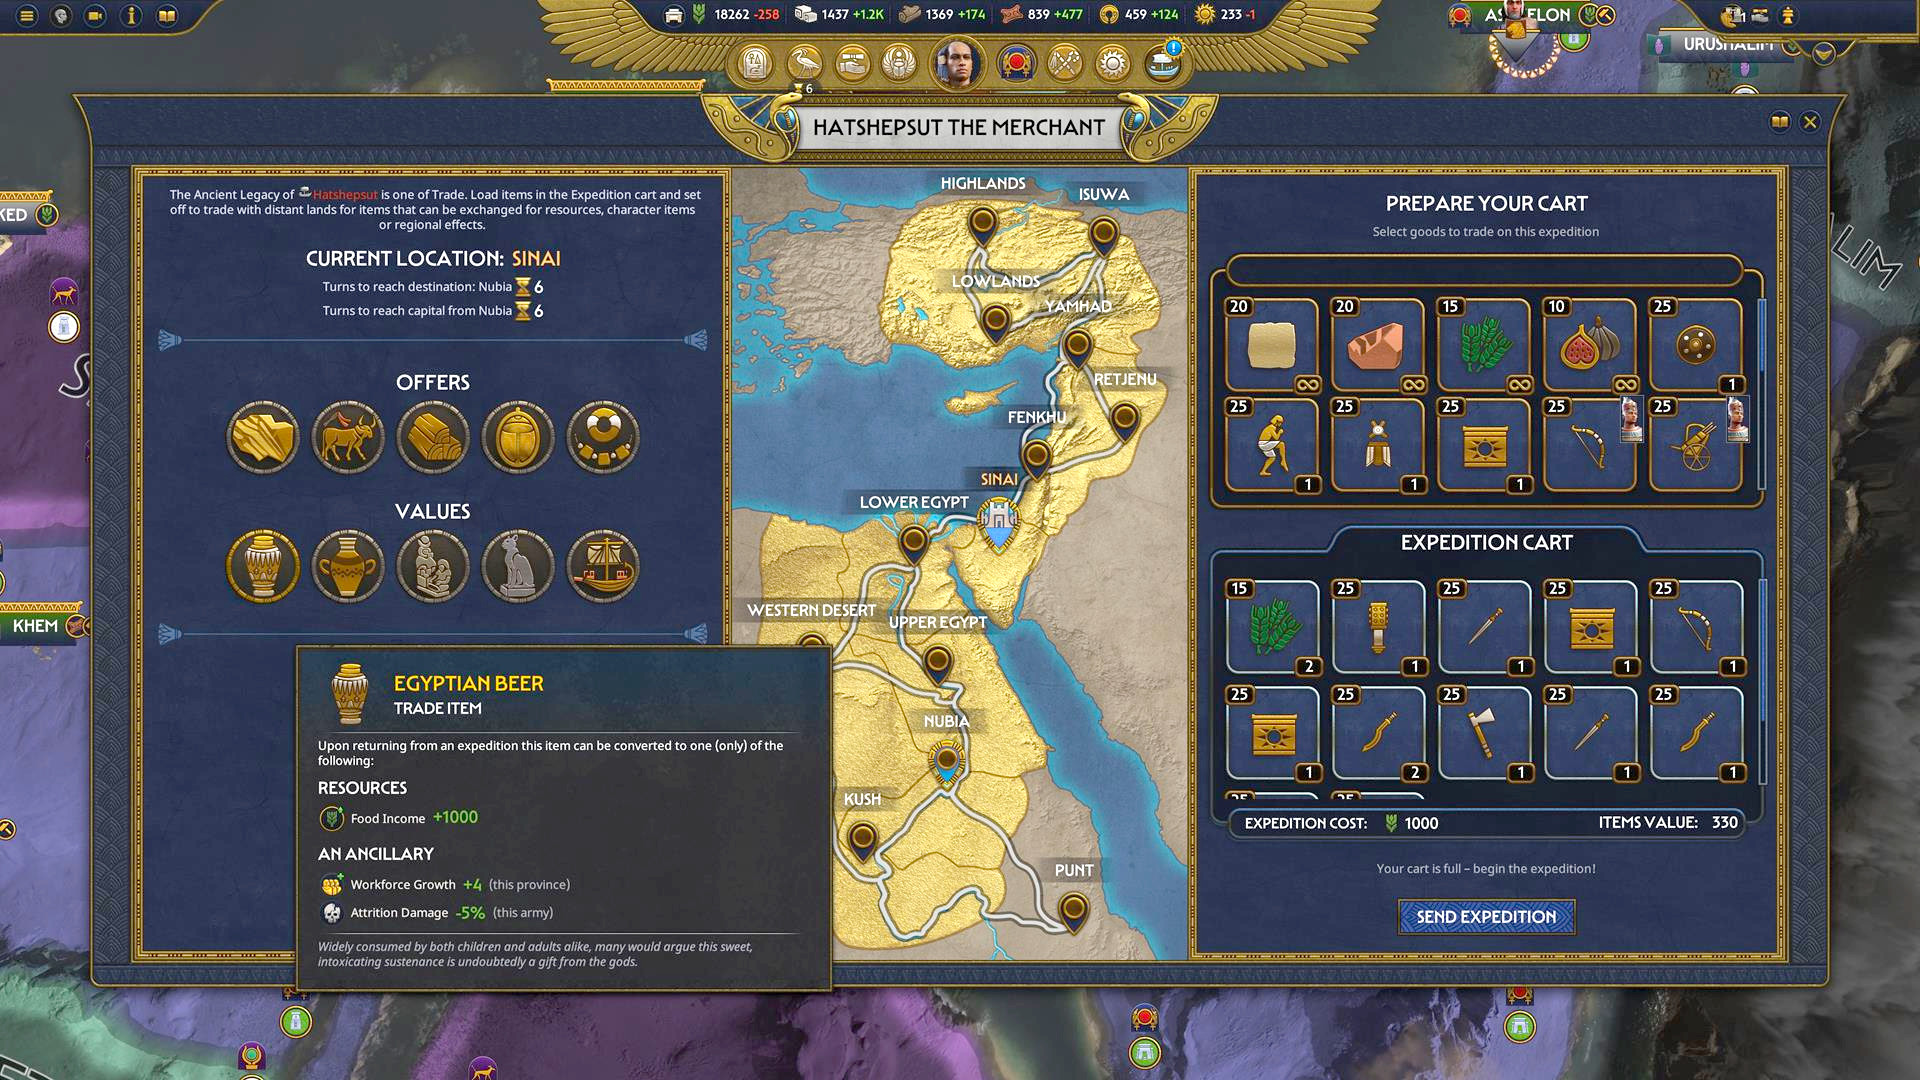 Review: 'Total War: Pharaoh' Boasts a Rich Campaign Map Befitting